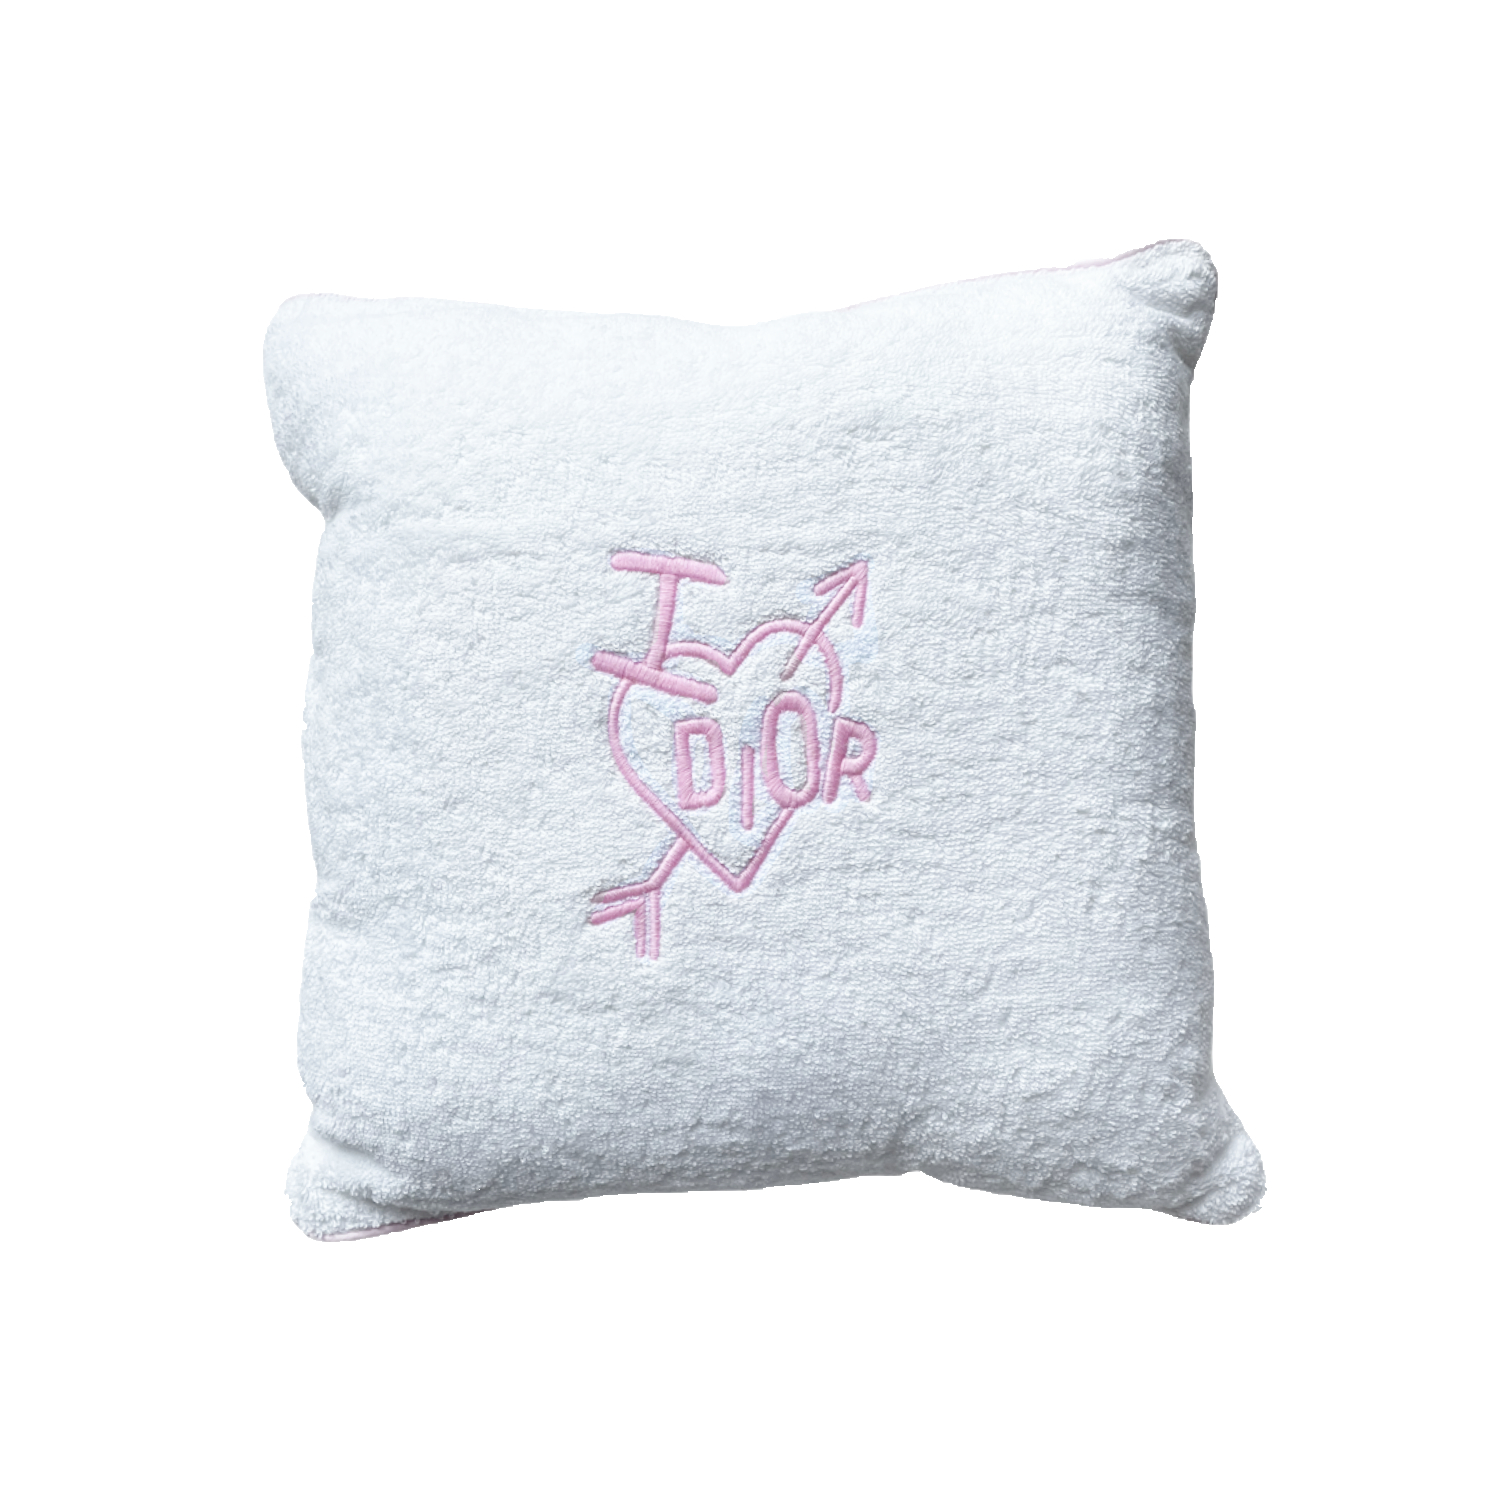 Vintage Vintage Dior Terrycloth 'I Love Dior' Cushion in white and baby pink | NITRYL